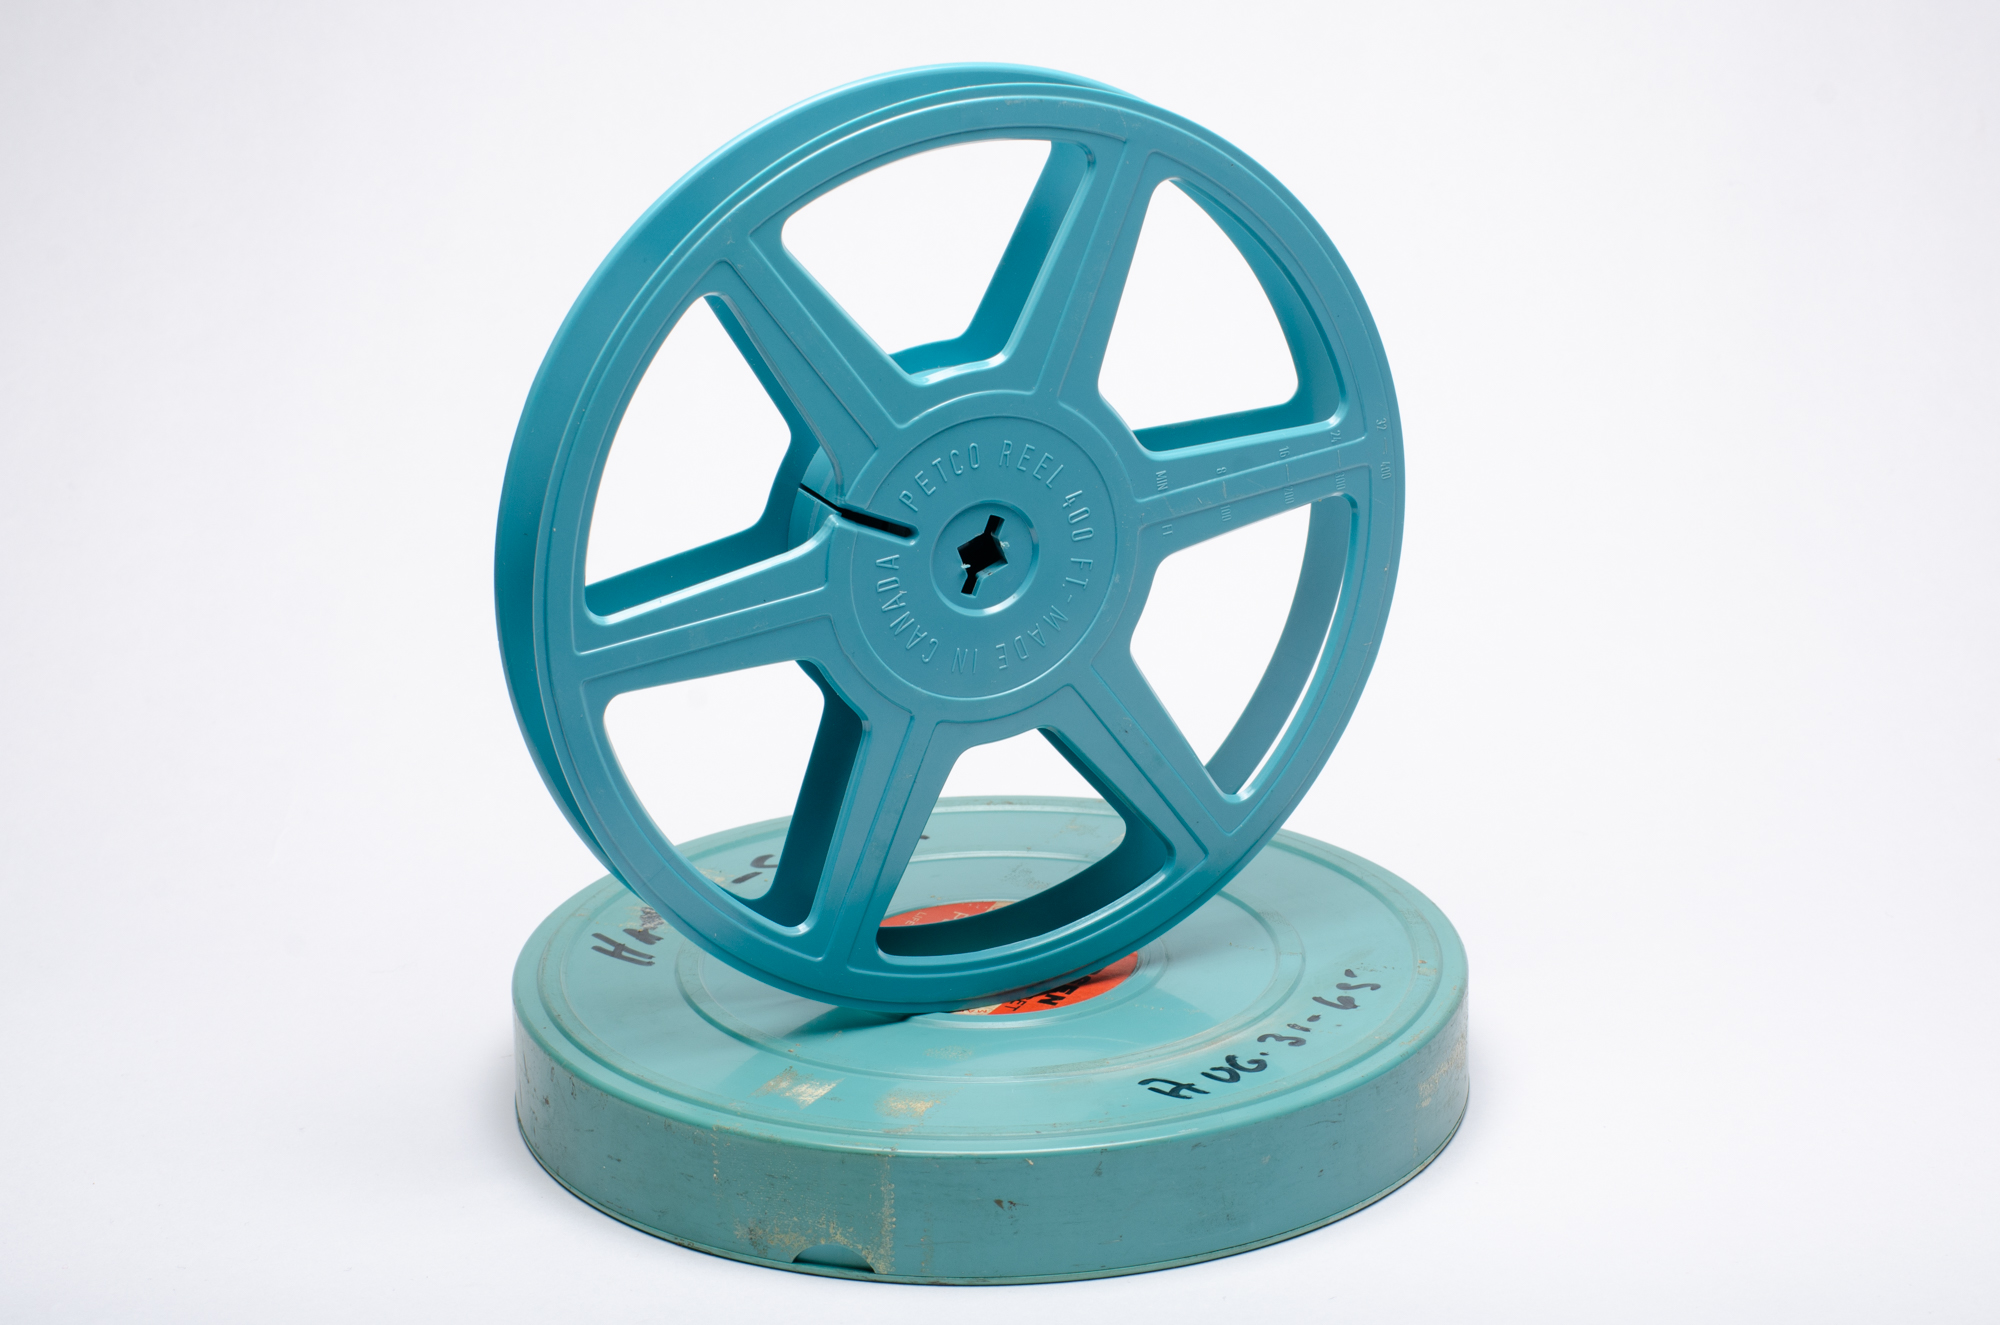 Super 8mm 50ft Plastic Reel – Liaison of Independent Filmmakers of Toronto